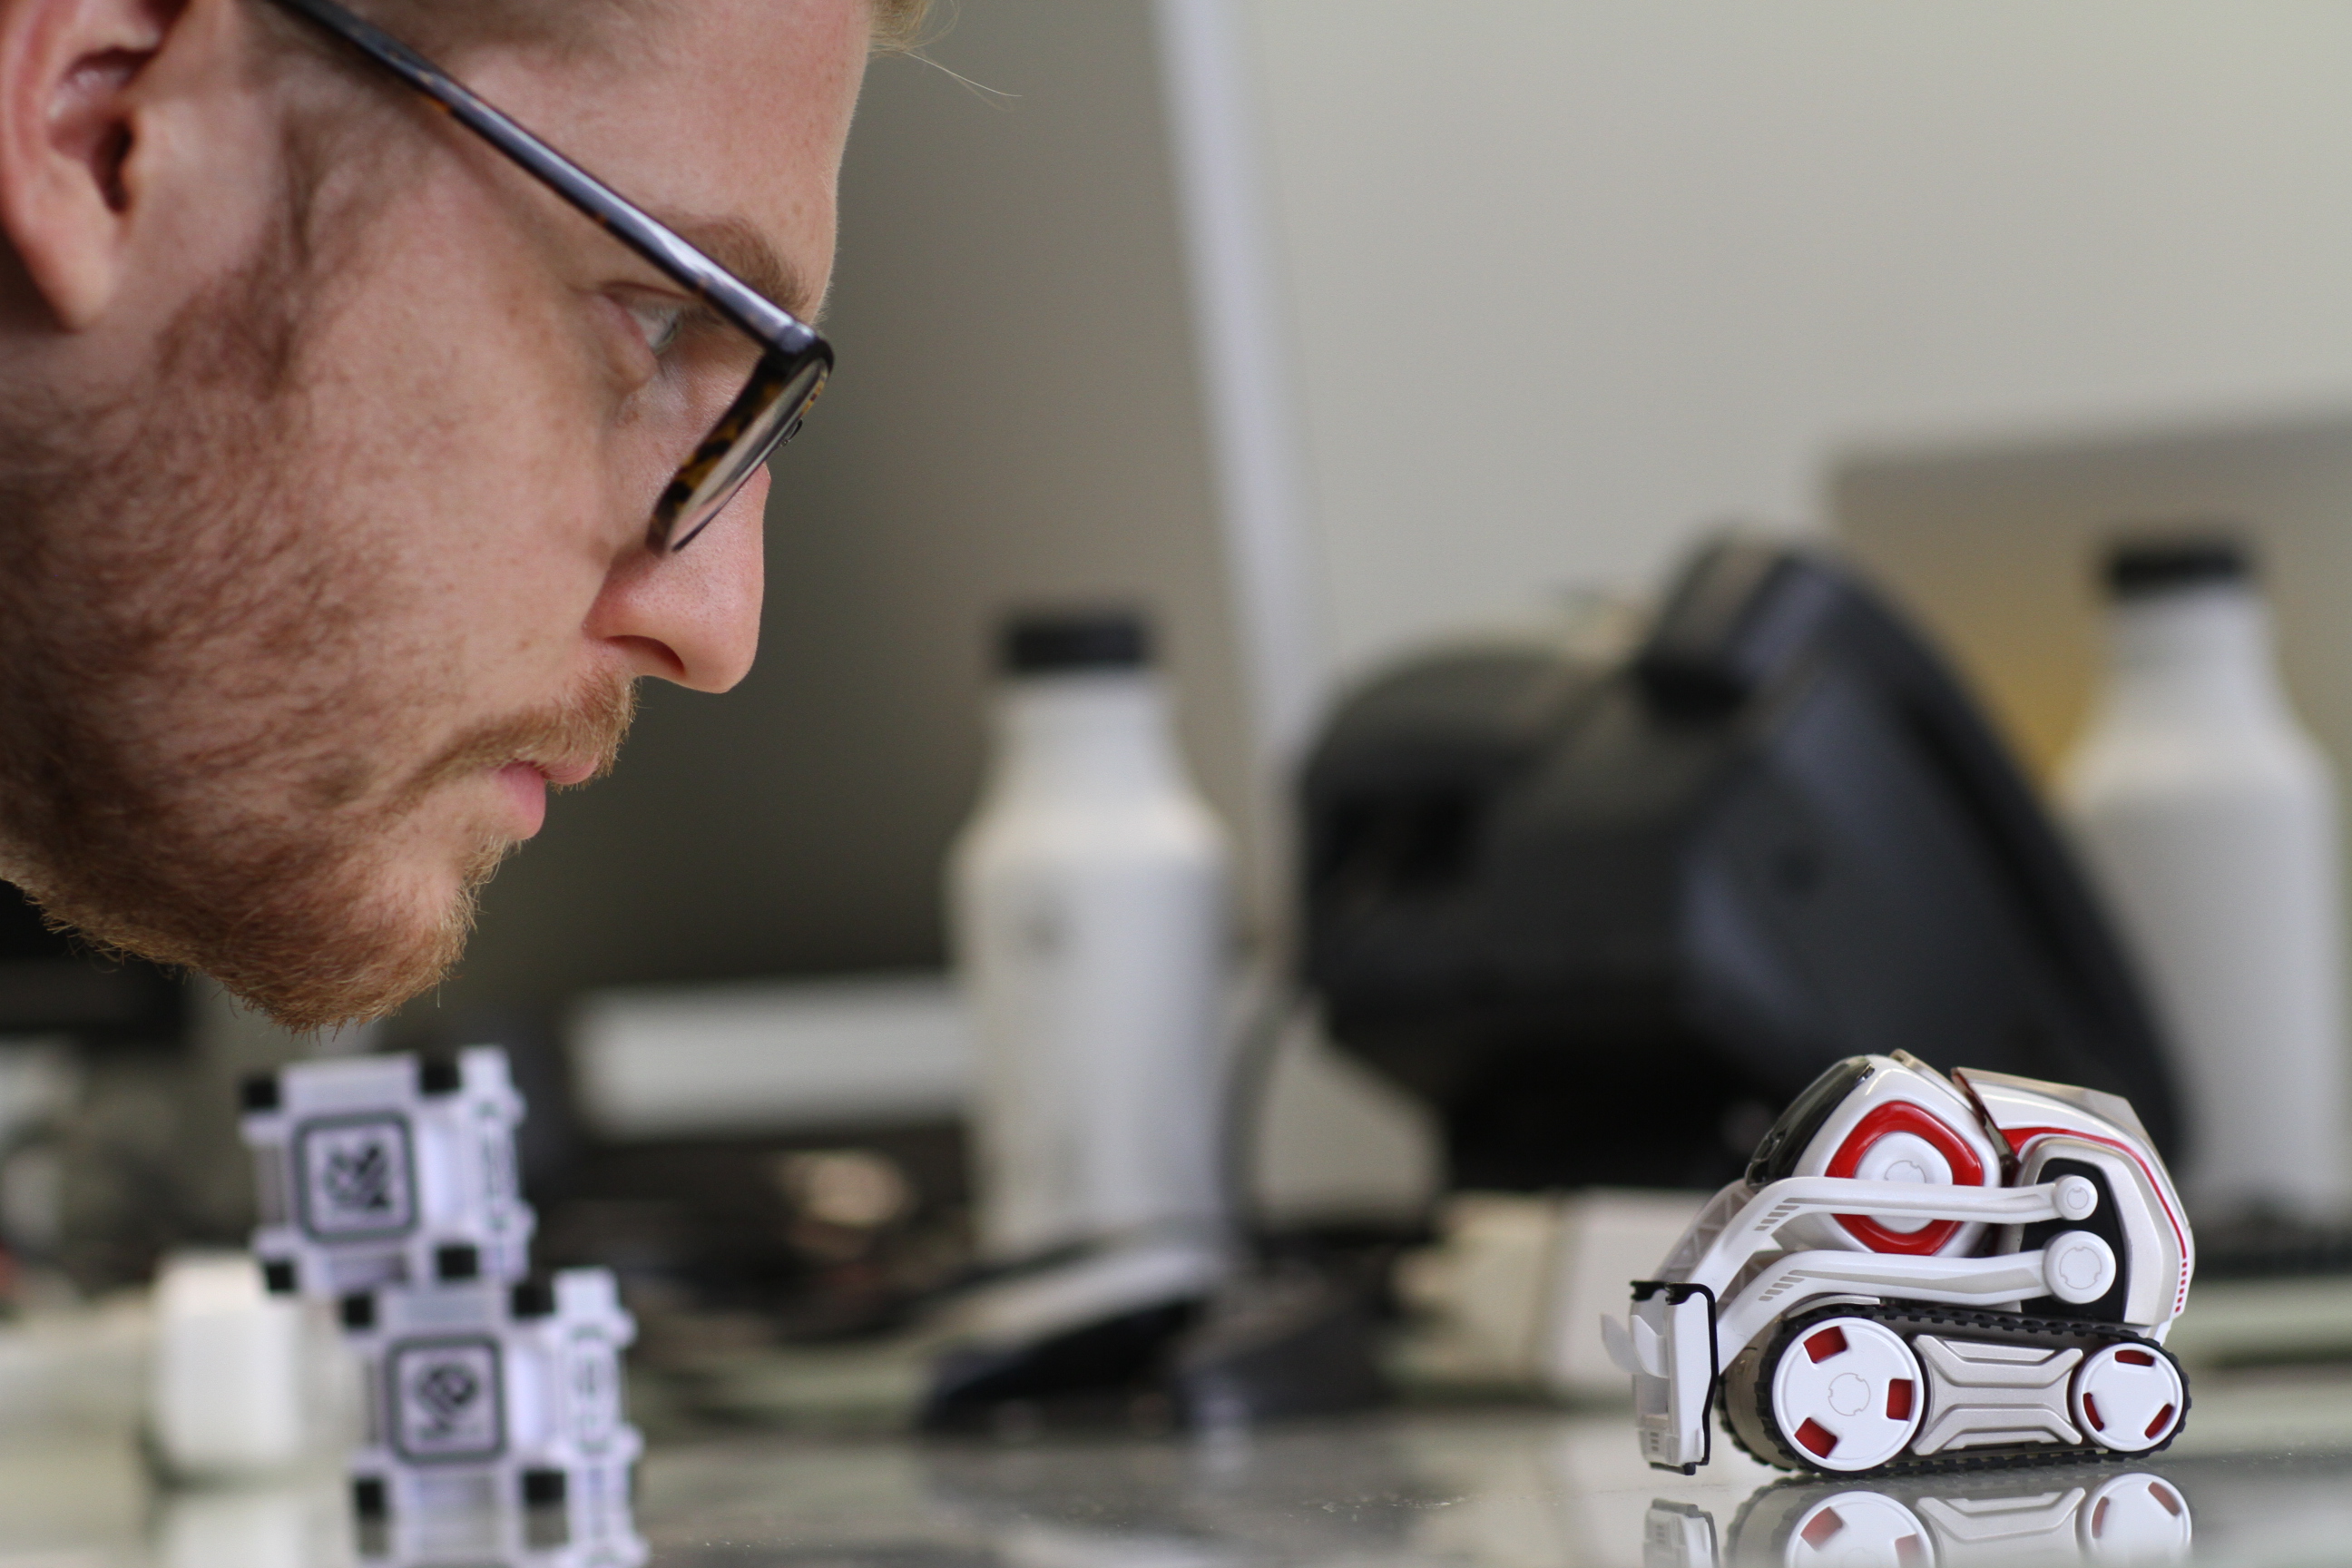 Cozmo is an endearing little robot with growing up to do ...